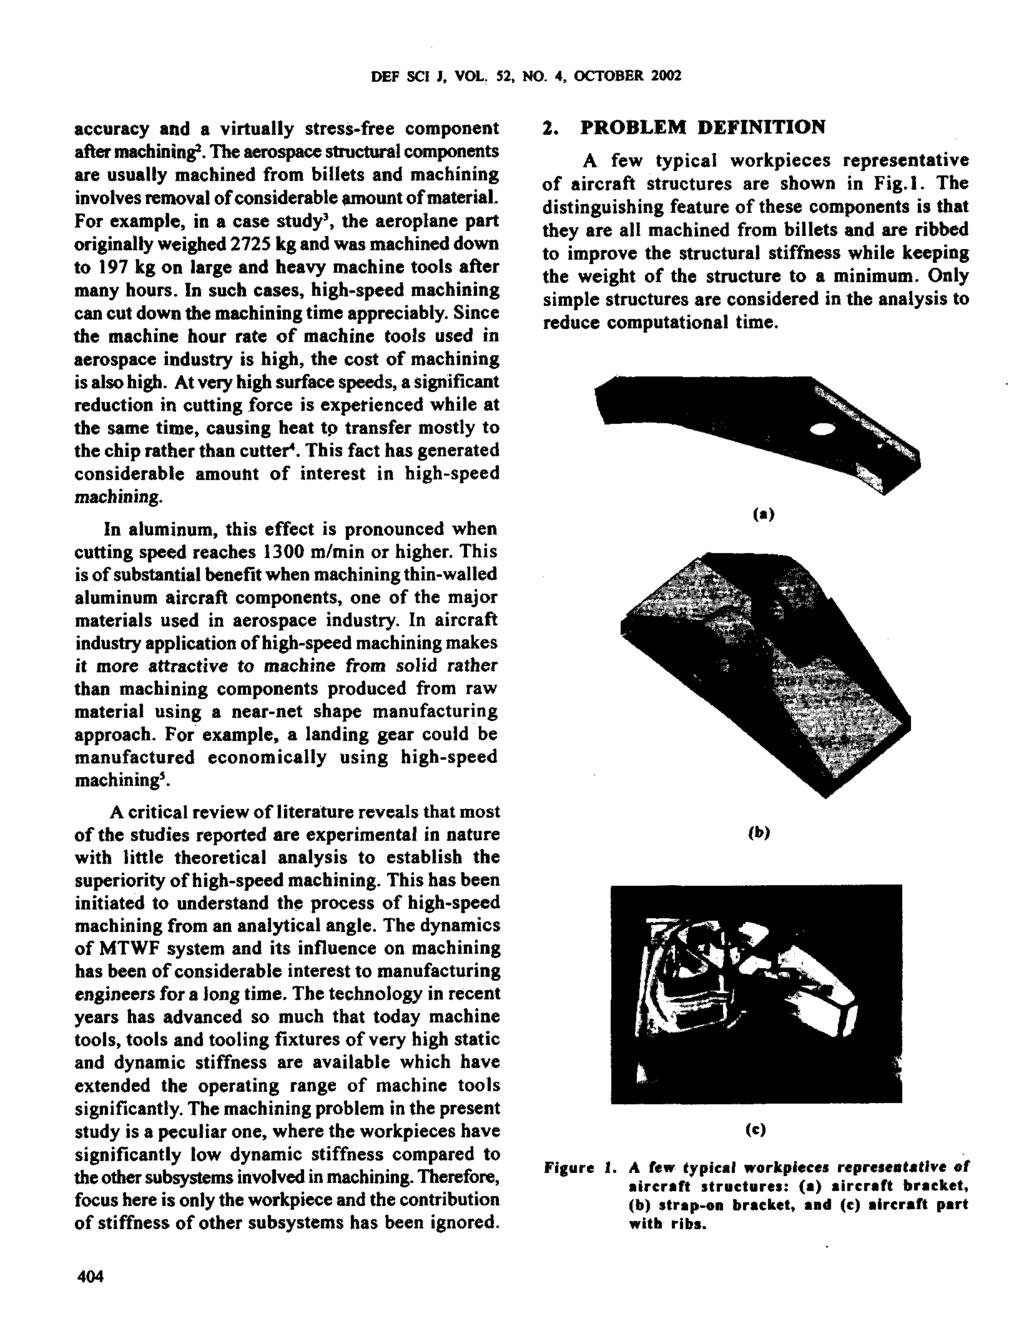 DEF SCI I. VOL. 52, NO. 4, OCTOBER 2002 accuracy and a virtually stress-free component a h machiinin$.